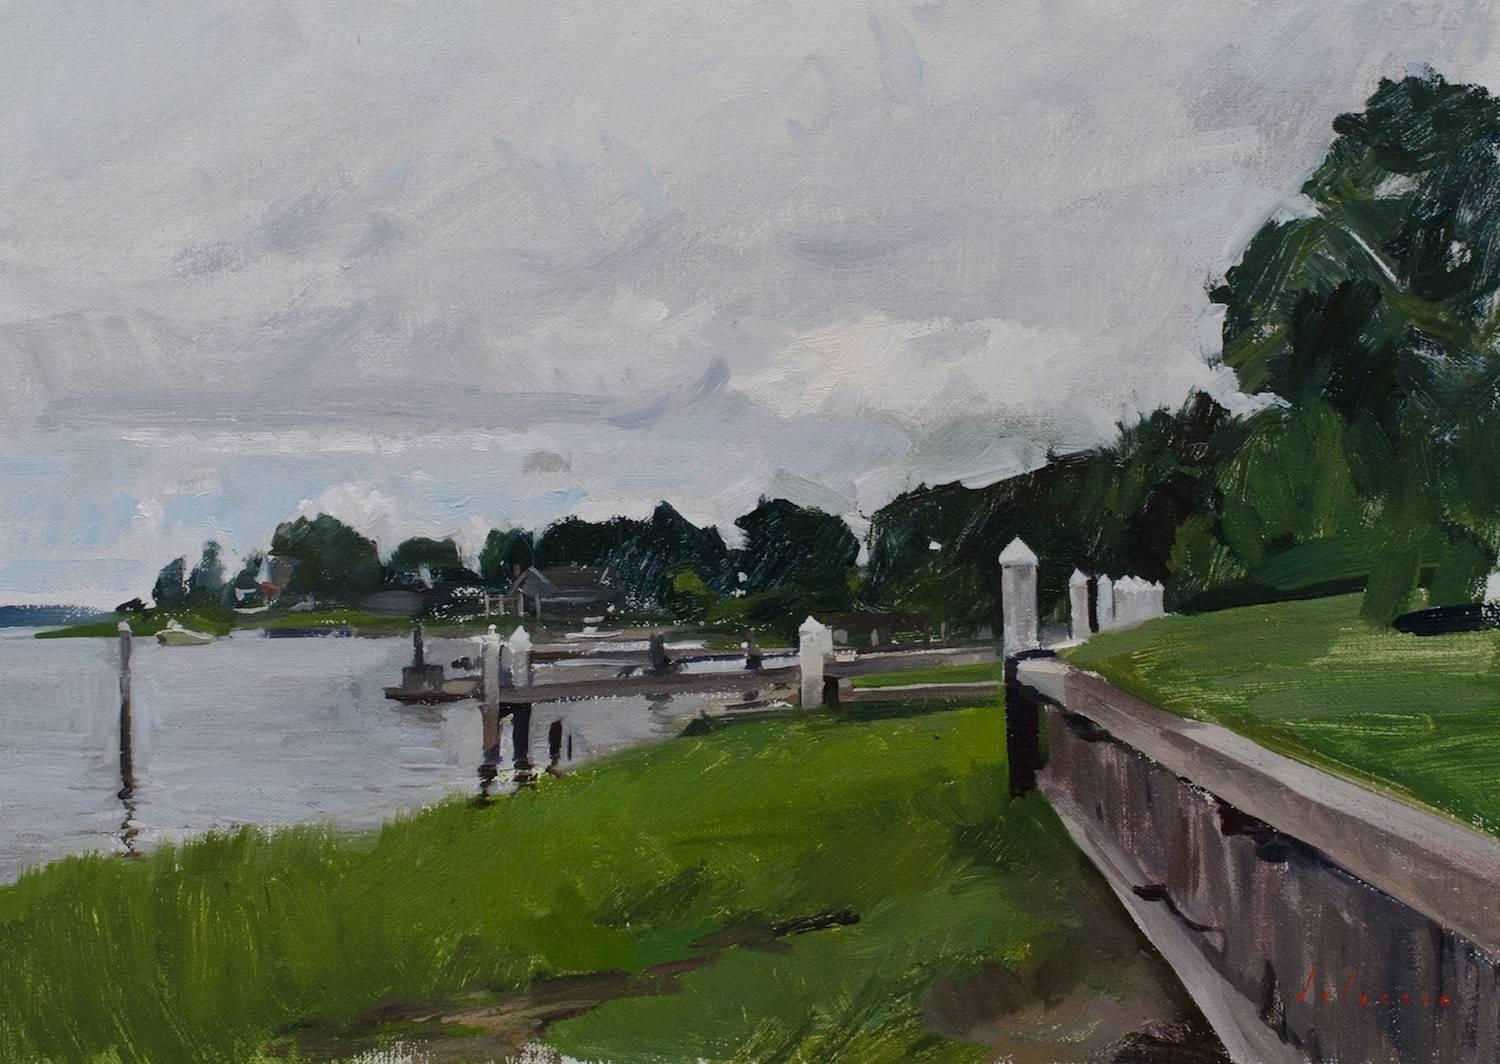 "Rick's Dock" - contemporary landscape painting at Hamptons House, Sag Harbor NY - Painting by Marc Dalessio